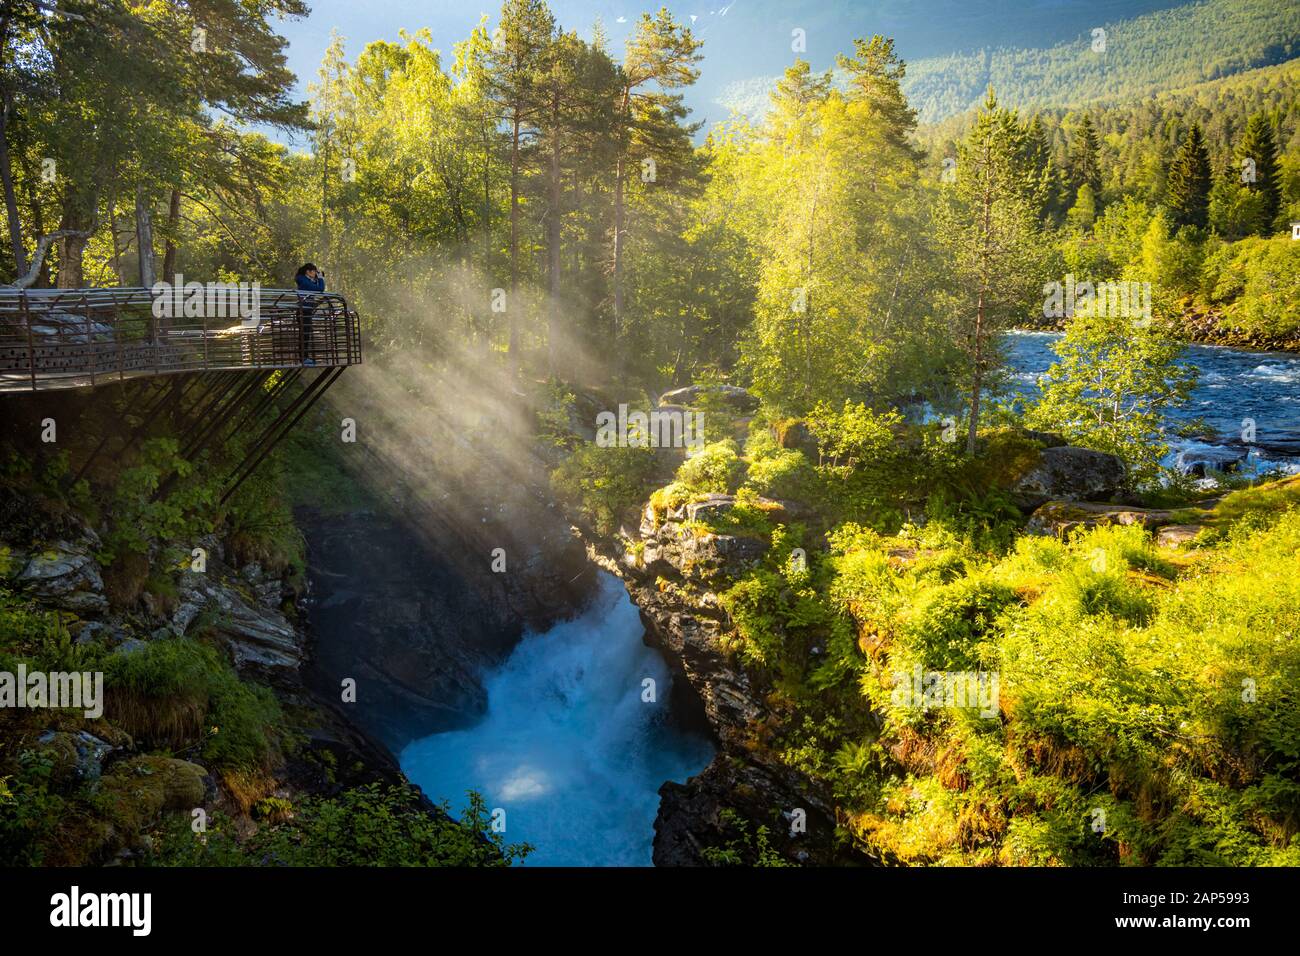 Beautiful Nature Norway. Gudbrandsjuvet is a 5 metre narrow and 20–25 metre high ravine through which the Valldøla River forces itself. Stock Photo